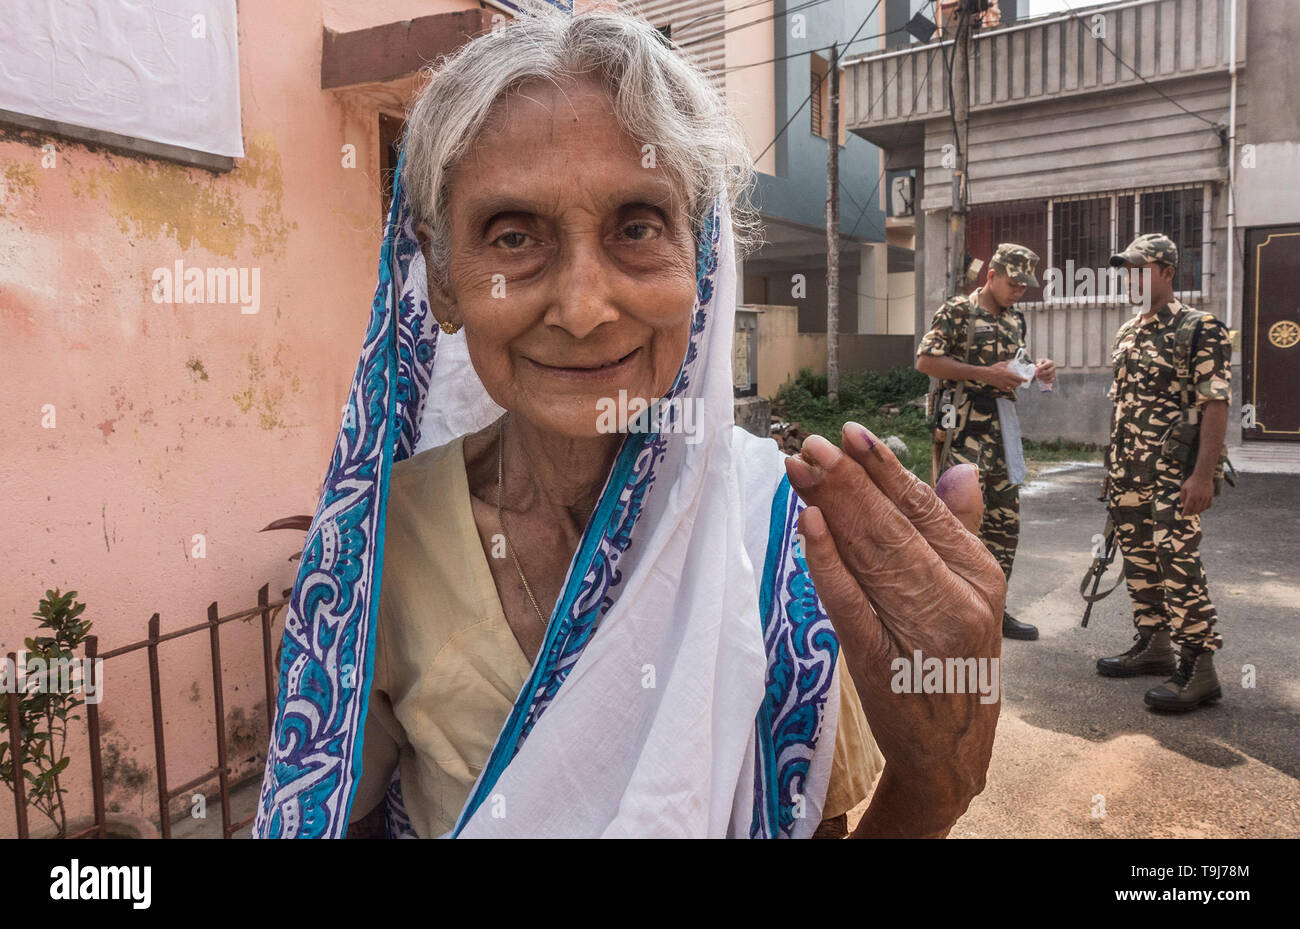 Kolkata, India. 19th May, 2019. A voter poses for photos after casting ballot at a polling station in Kolkata, India, May 19, 2019. The seventh and final phase of polling of the ongoing 17th general elections began in 59 parliamentary constituencies on Sunday, across seven states and one union territory. Results are slated to be announced on May 23. Credit: Tumpa Mondal/Xinhua/Alamy Live News Stock Photo